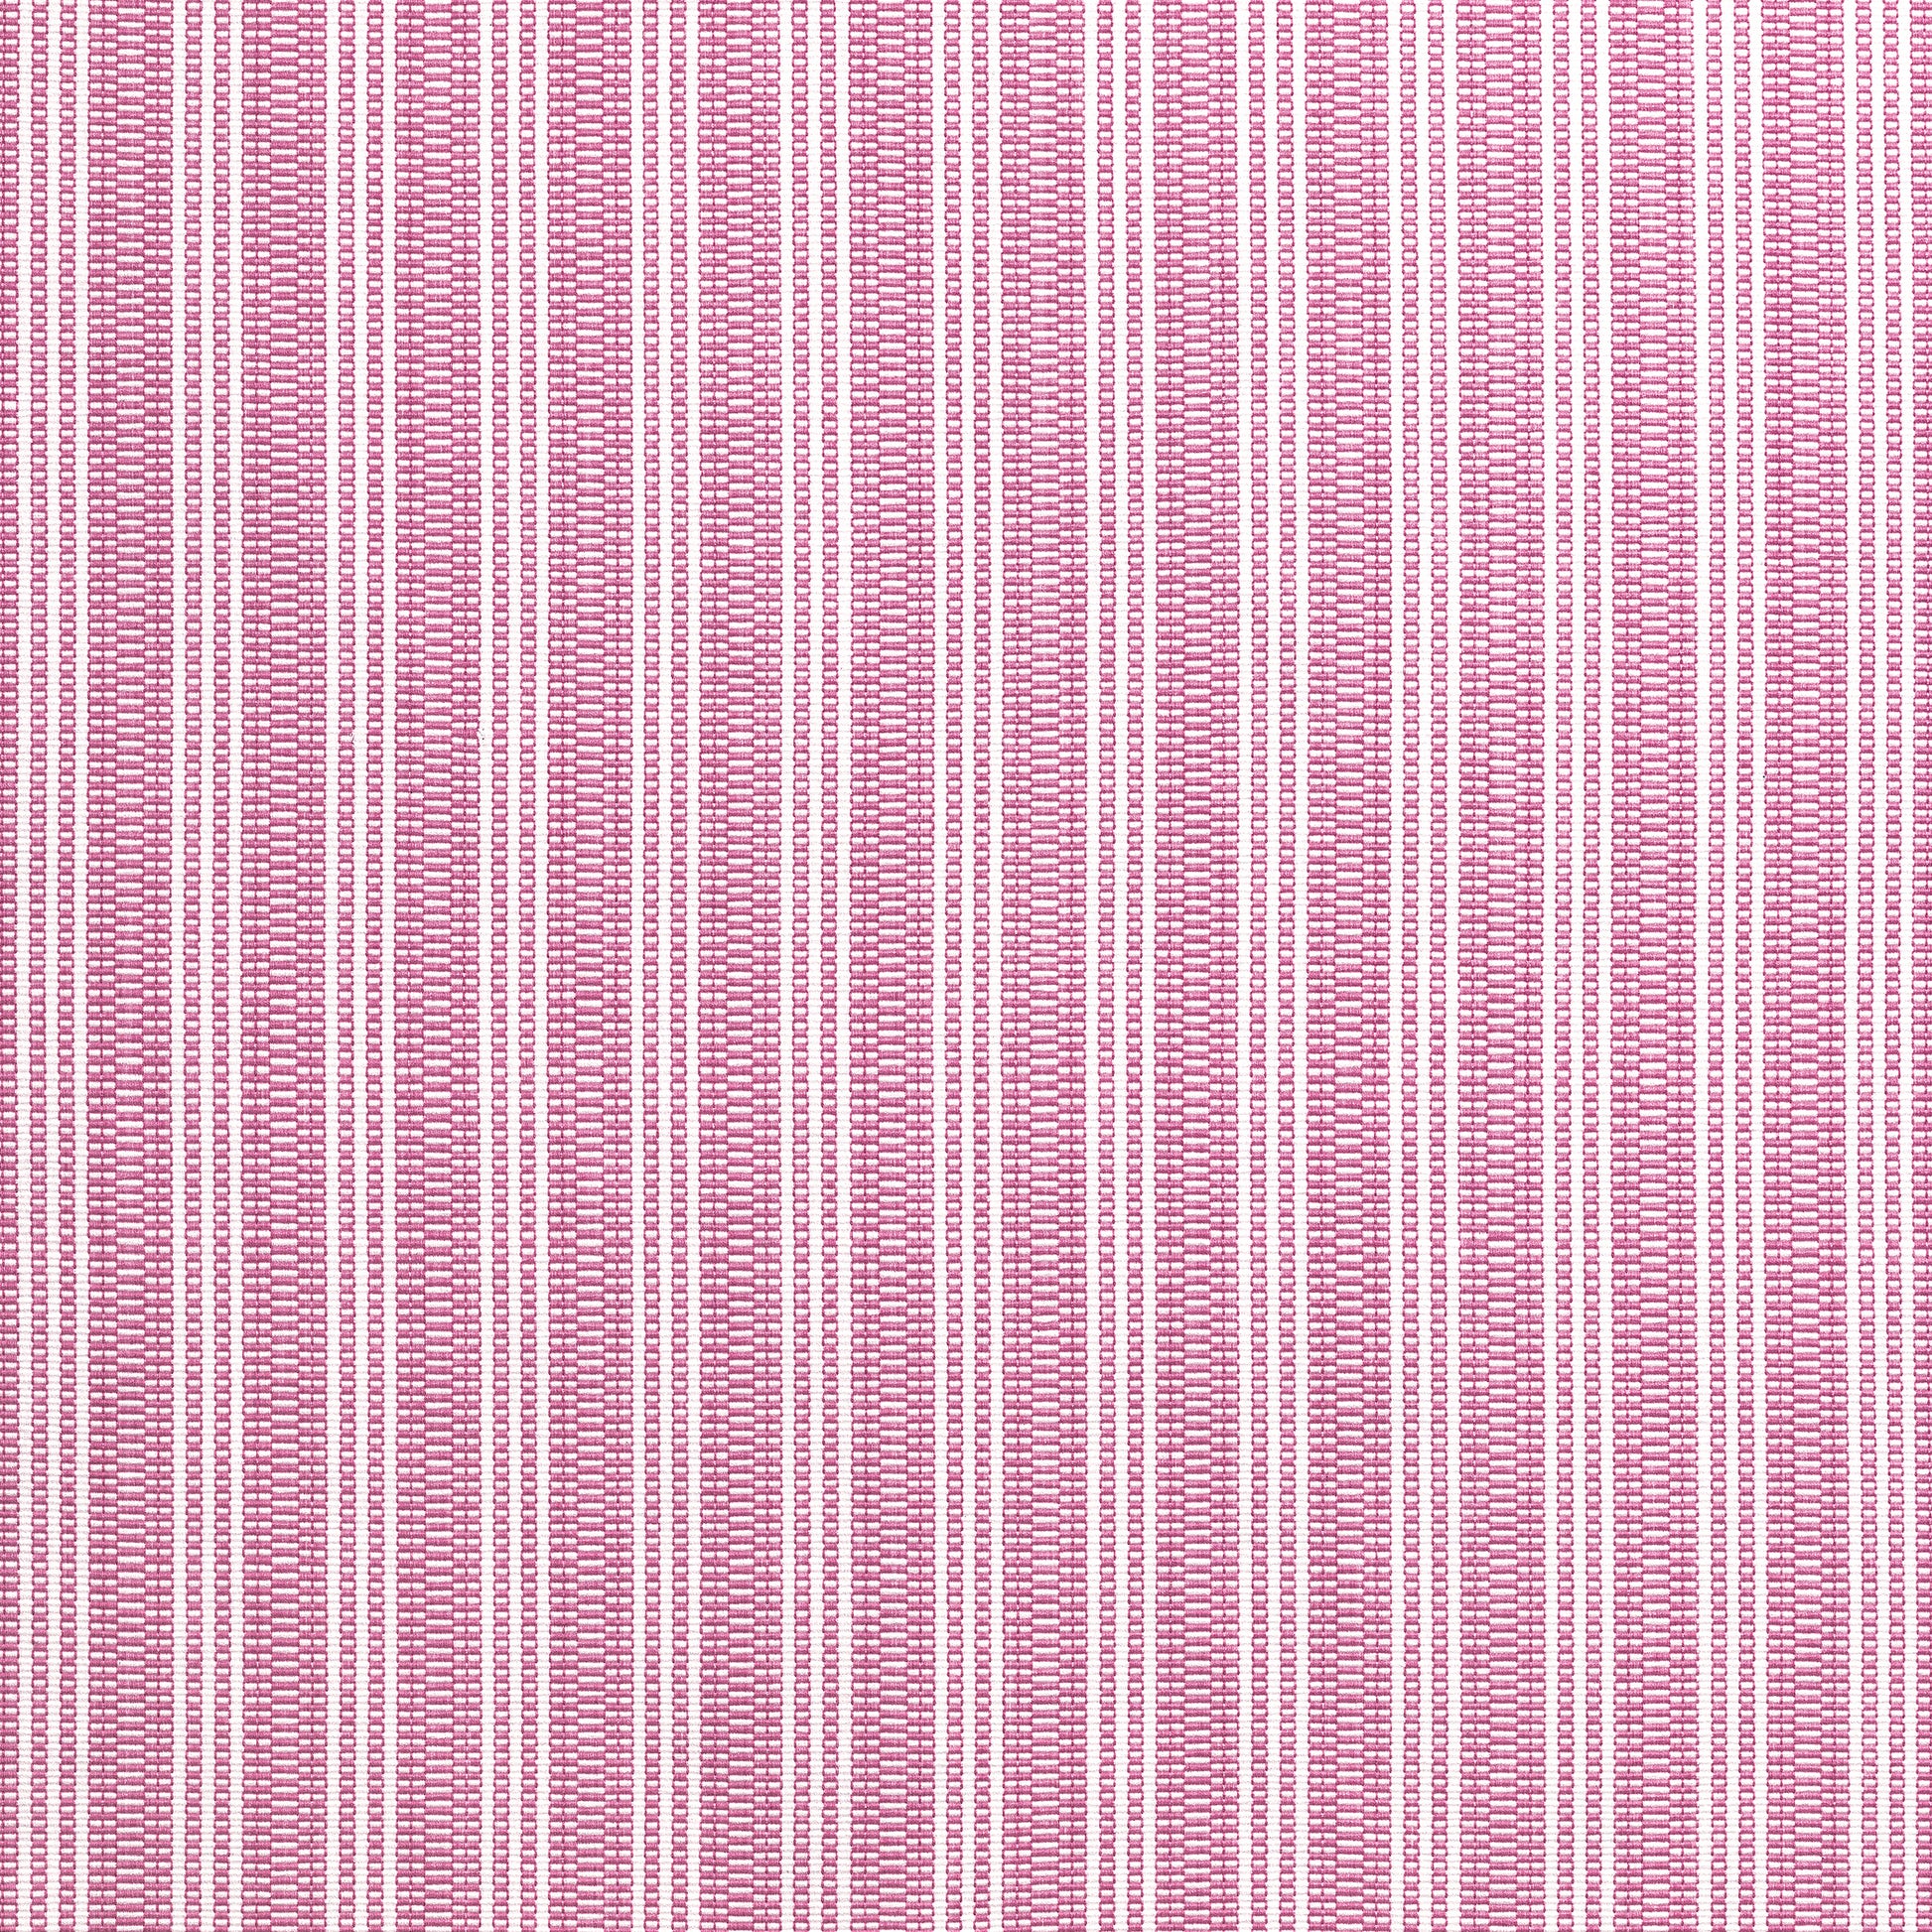 Purchase  Ann French Fabric Item# AW9849  pattern name  Reed Stripe